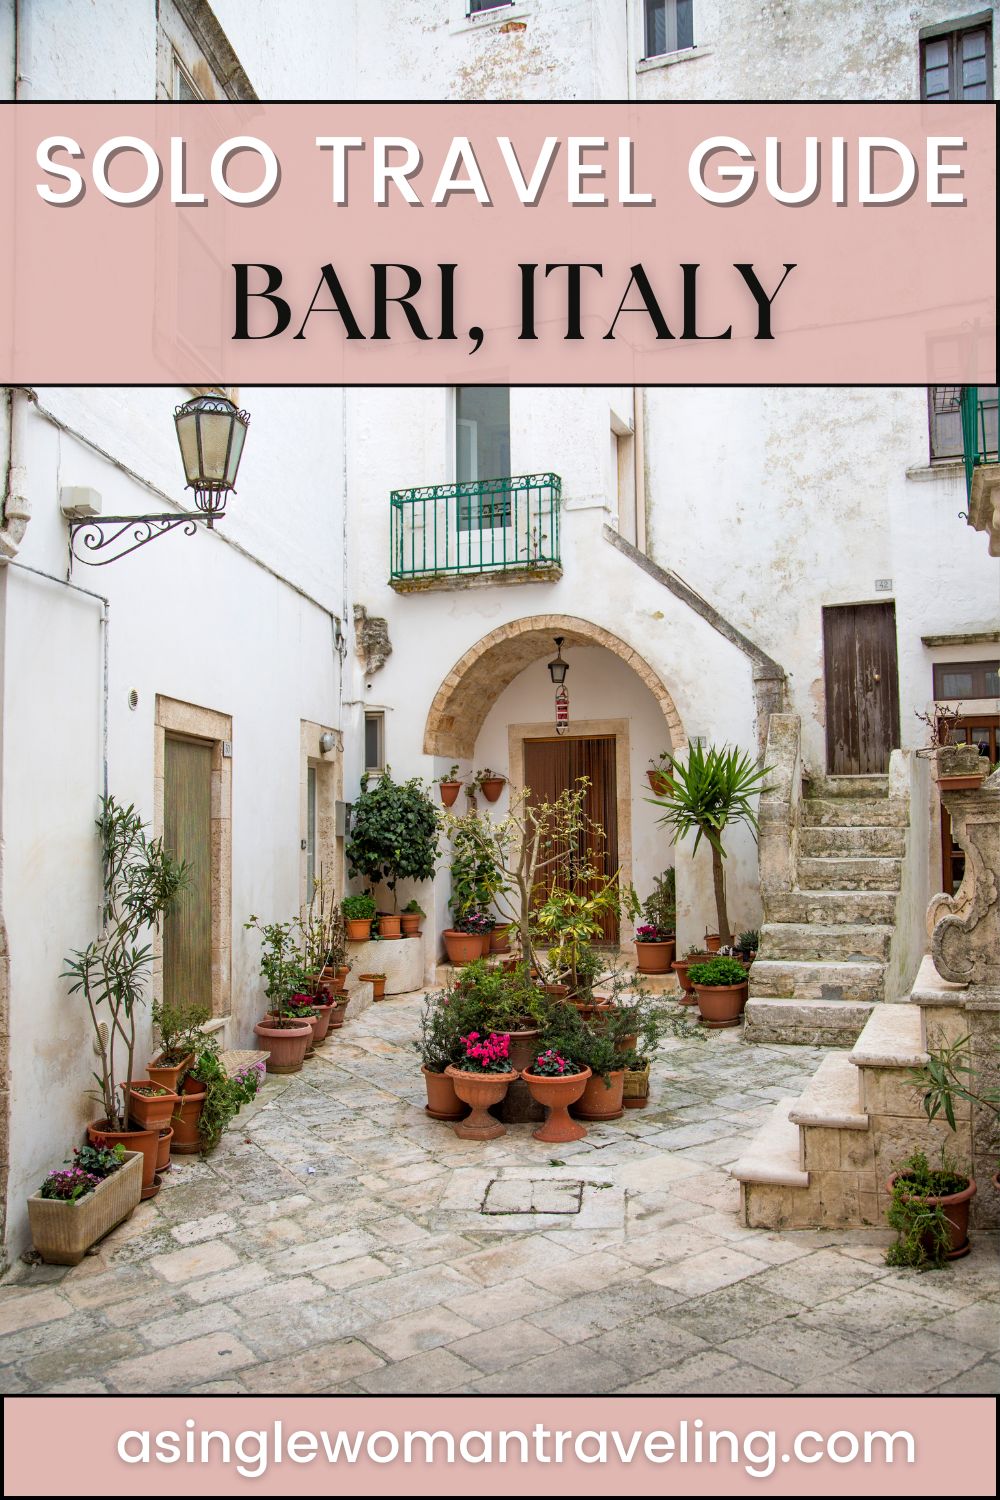 Solo Travel Guide to Bari, Italy. A charming courtyard in Bari with potted plants and rustic stone stairs. Text overlay reads 'Solo Travel Guide Bari, Italy' and 'asinglewomantraveling.com